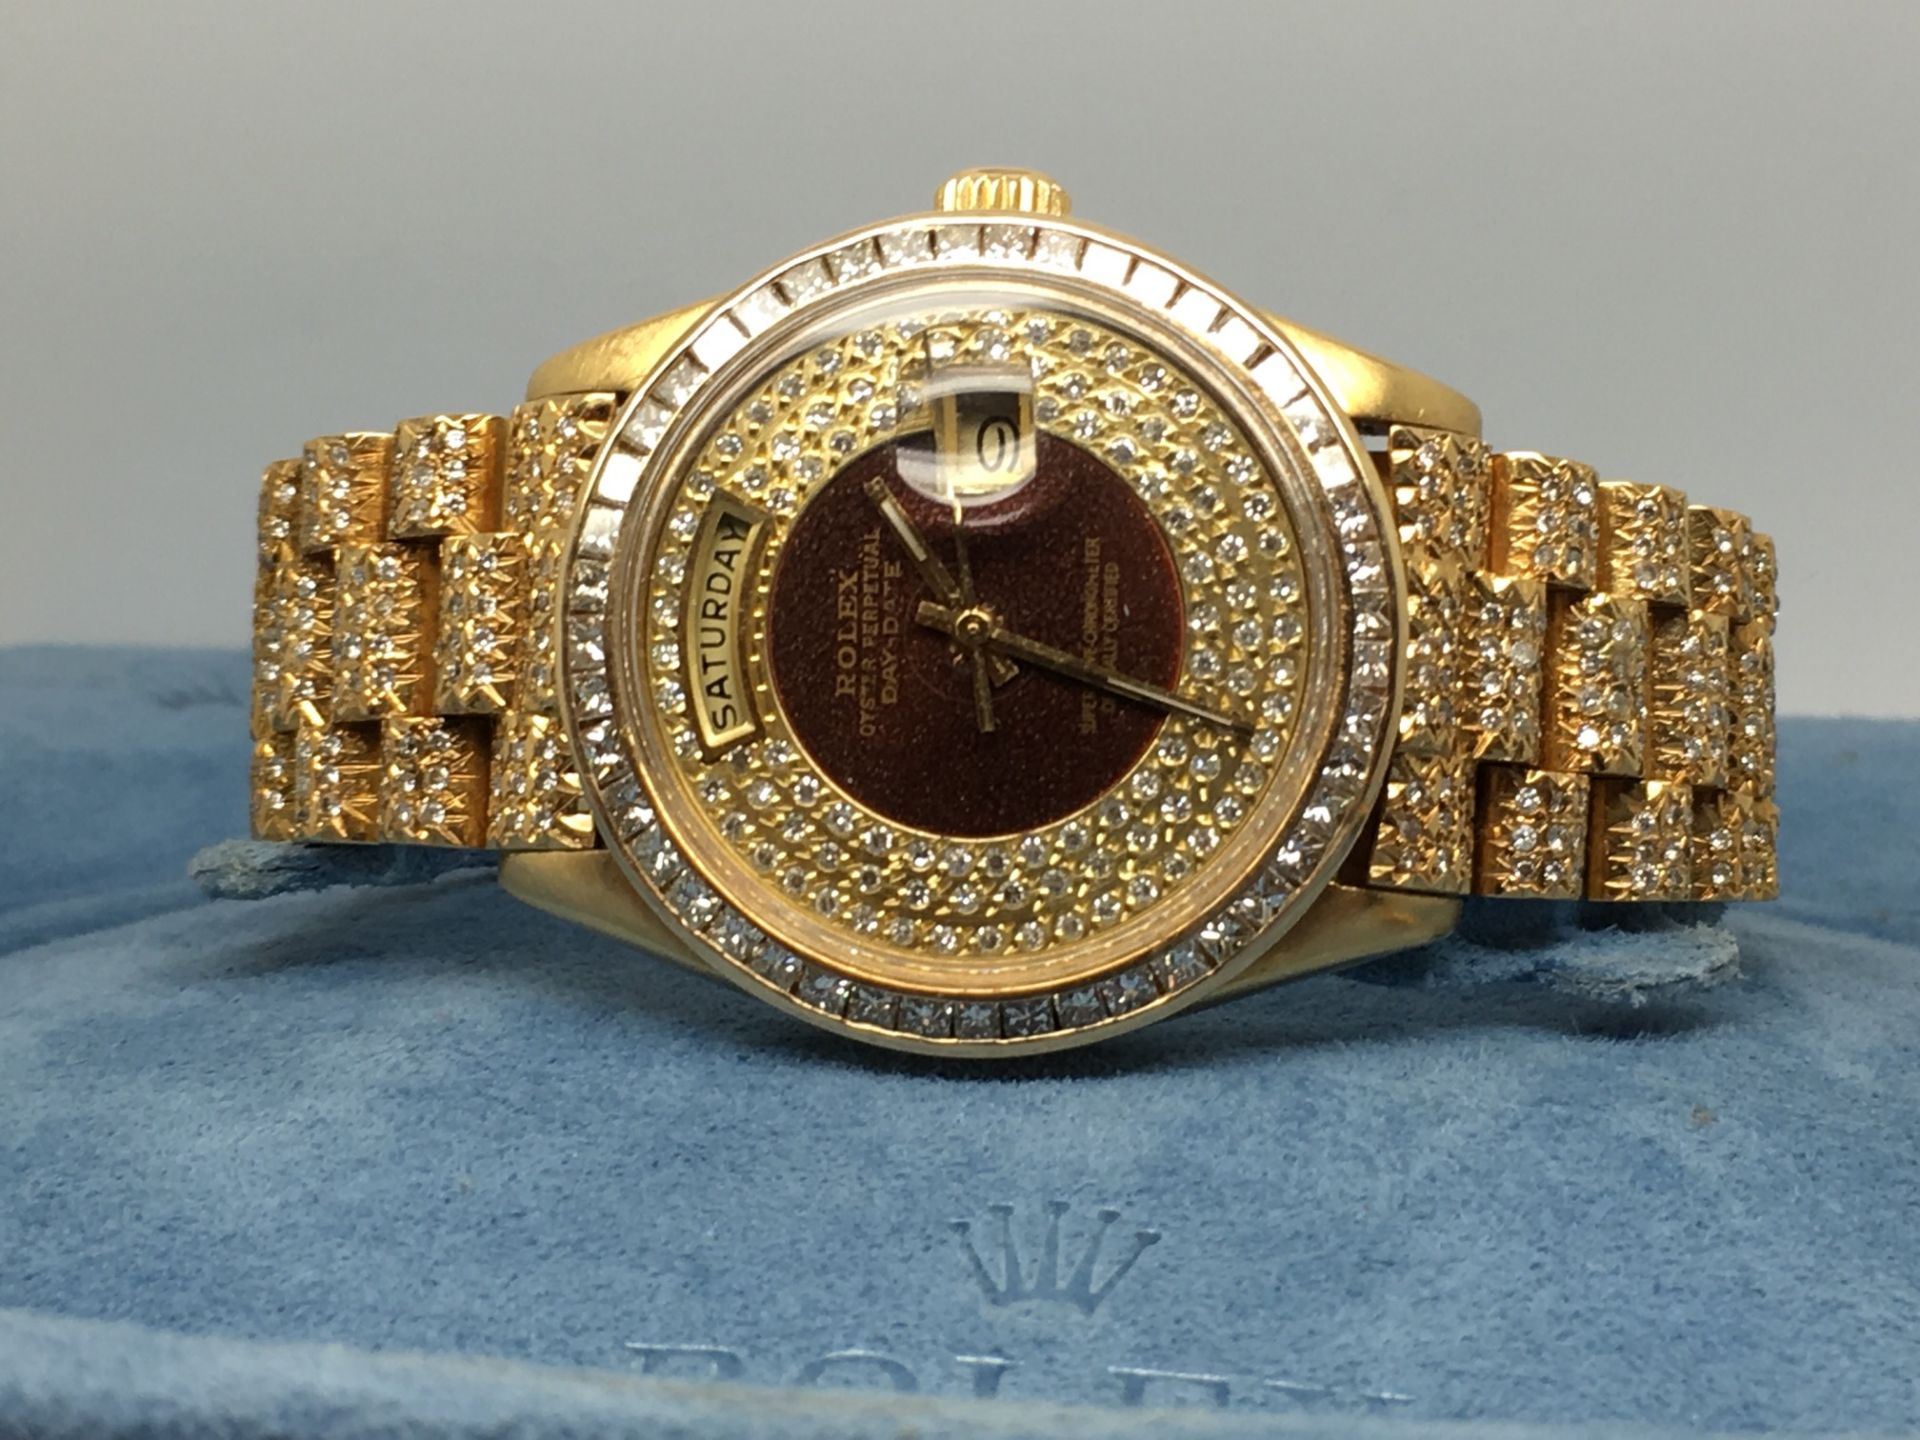 ** ROLEX PRESIDENTIAL Mens Solid 18K Diamond Encrusted Rolex Day-Date Watch VALUATION: £104,500 ** - Image 5 of 9